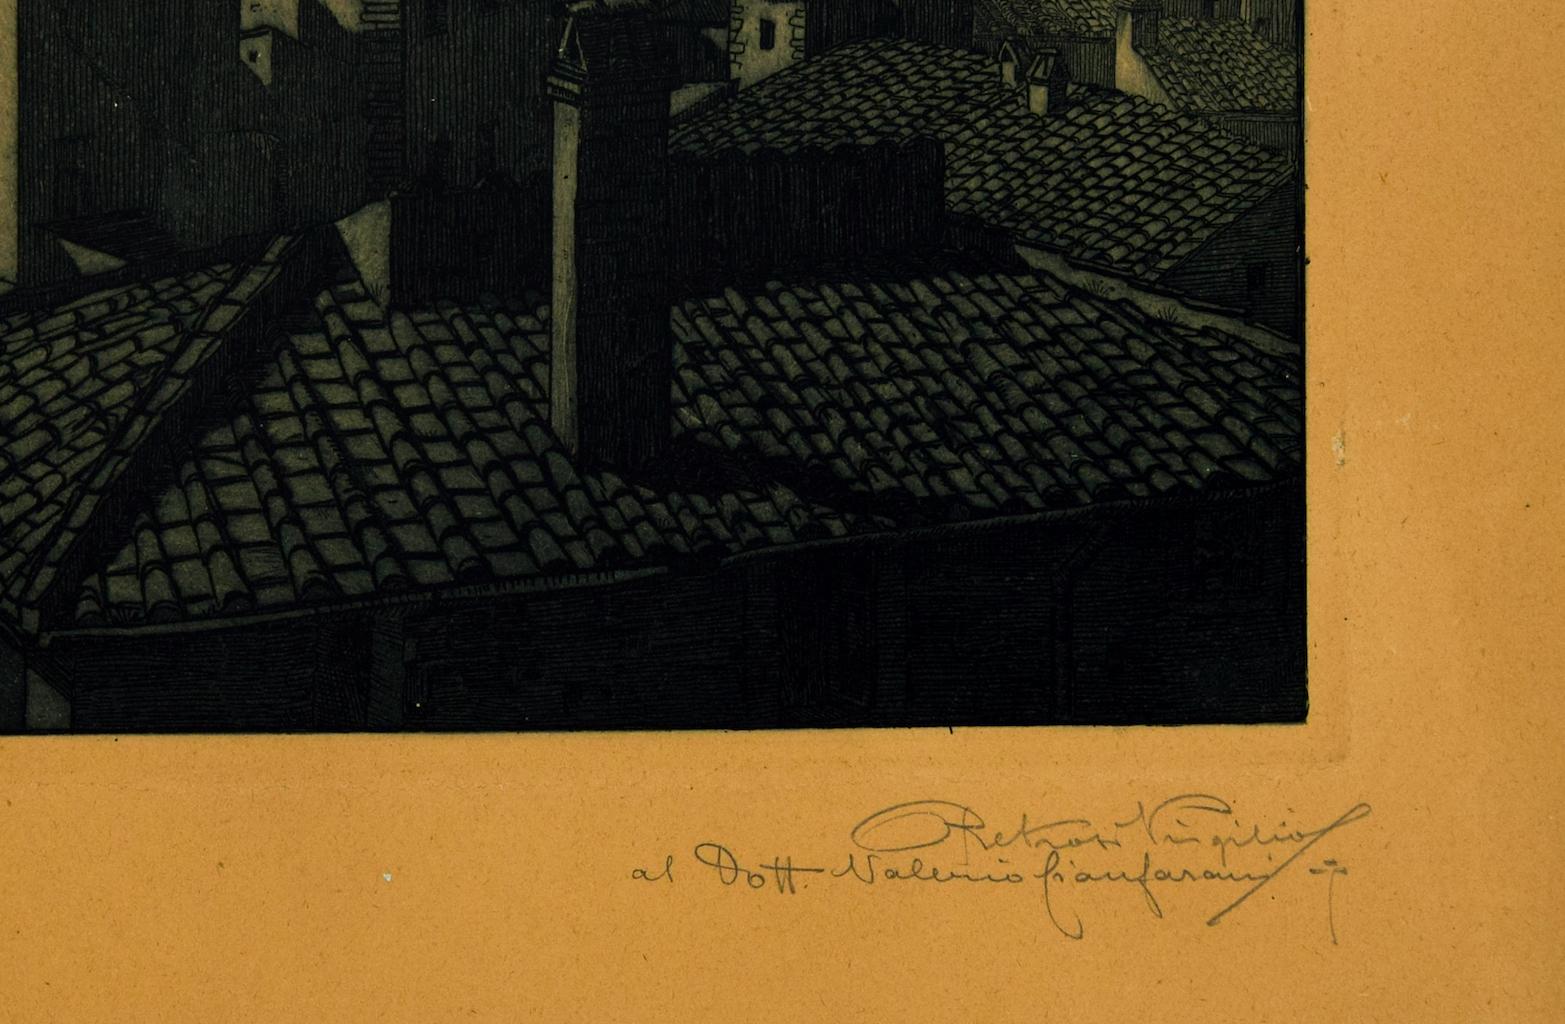 City in Night is an original etching artwork on cardboard realized by Virgilio Retrosi, a ceramist and engraver pupil of Duilio Cambellotti. 

Hand-signed on the lower left in pencil with dedication on the lower right, with dedication to 